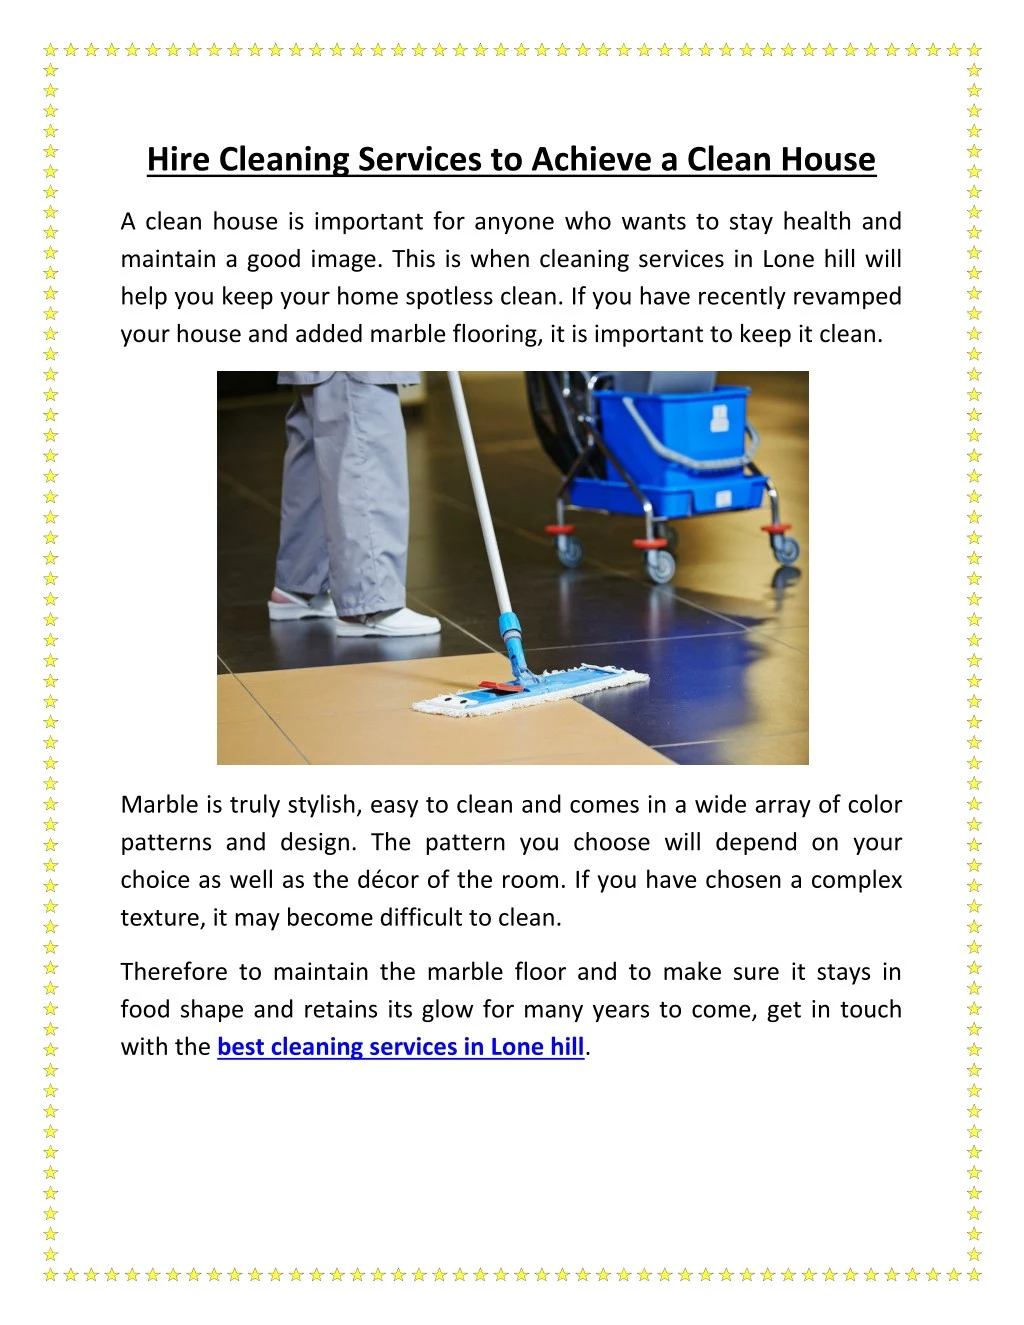 hire cleaning services to achieve a clean house